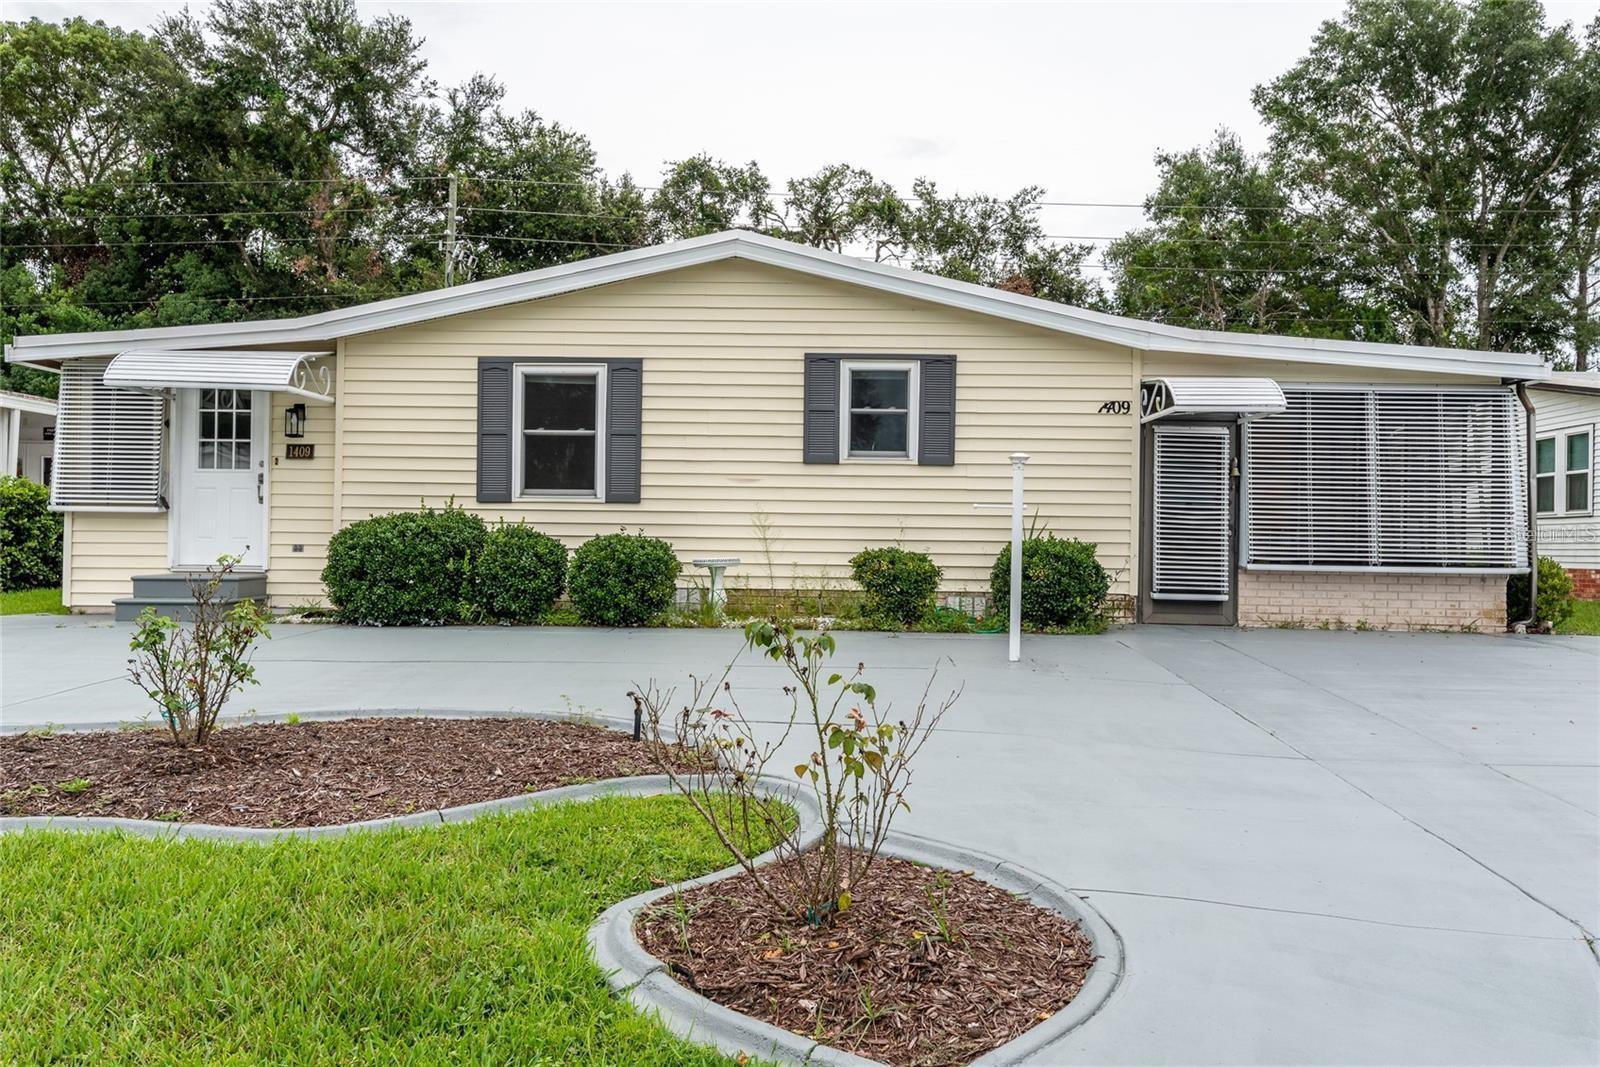 1409 SCHWARTZ, THE VILLAGES, Manufactured Home - Post 1977,  for sale, The Mount Dora Group 